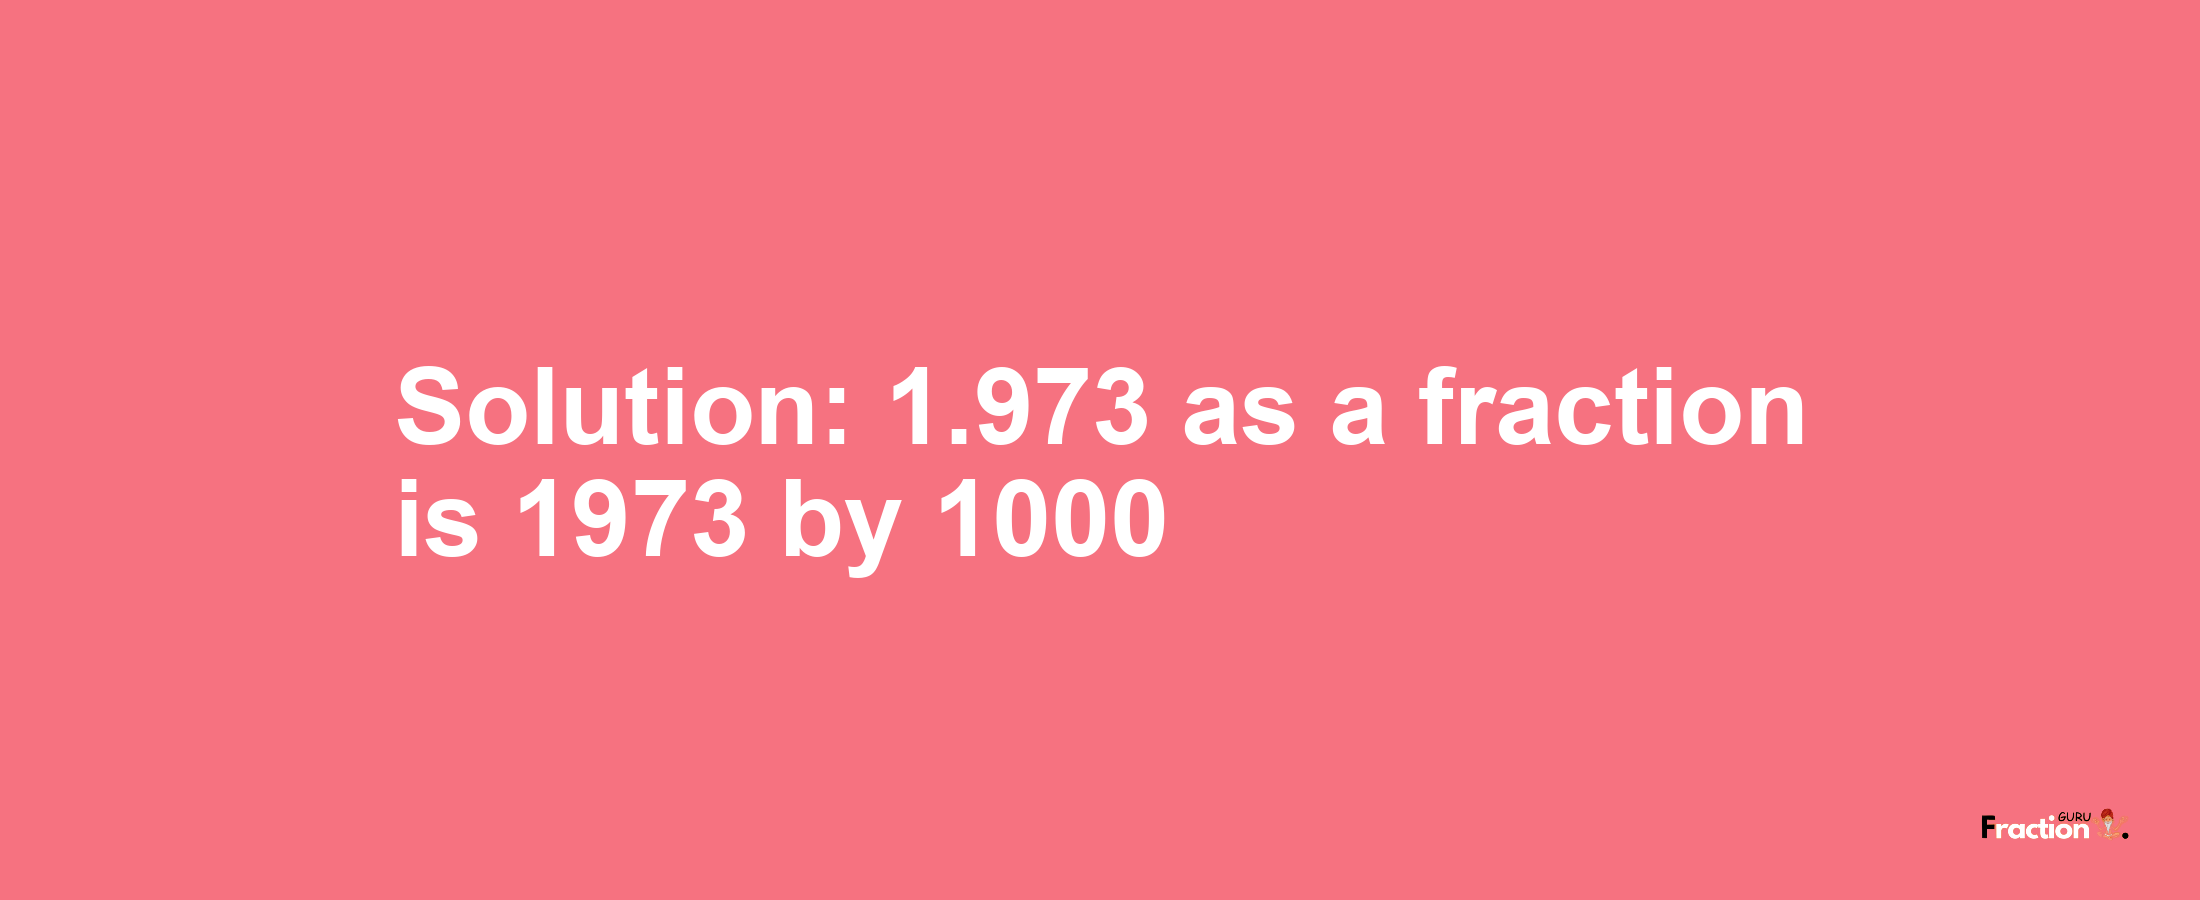 Solution:1.973 as a fraction is 1973/1000